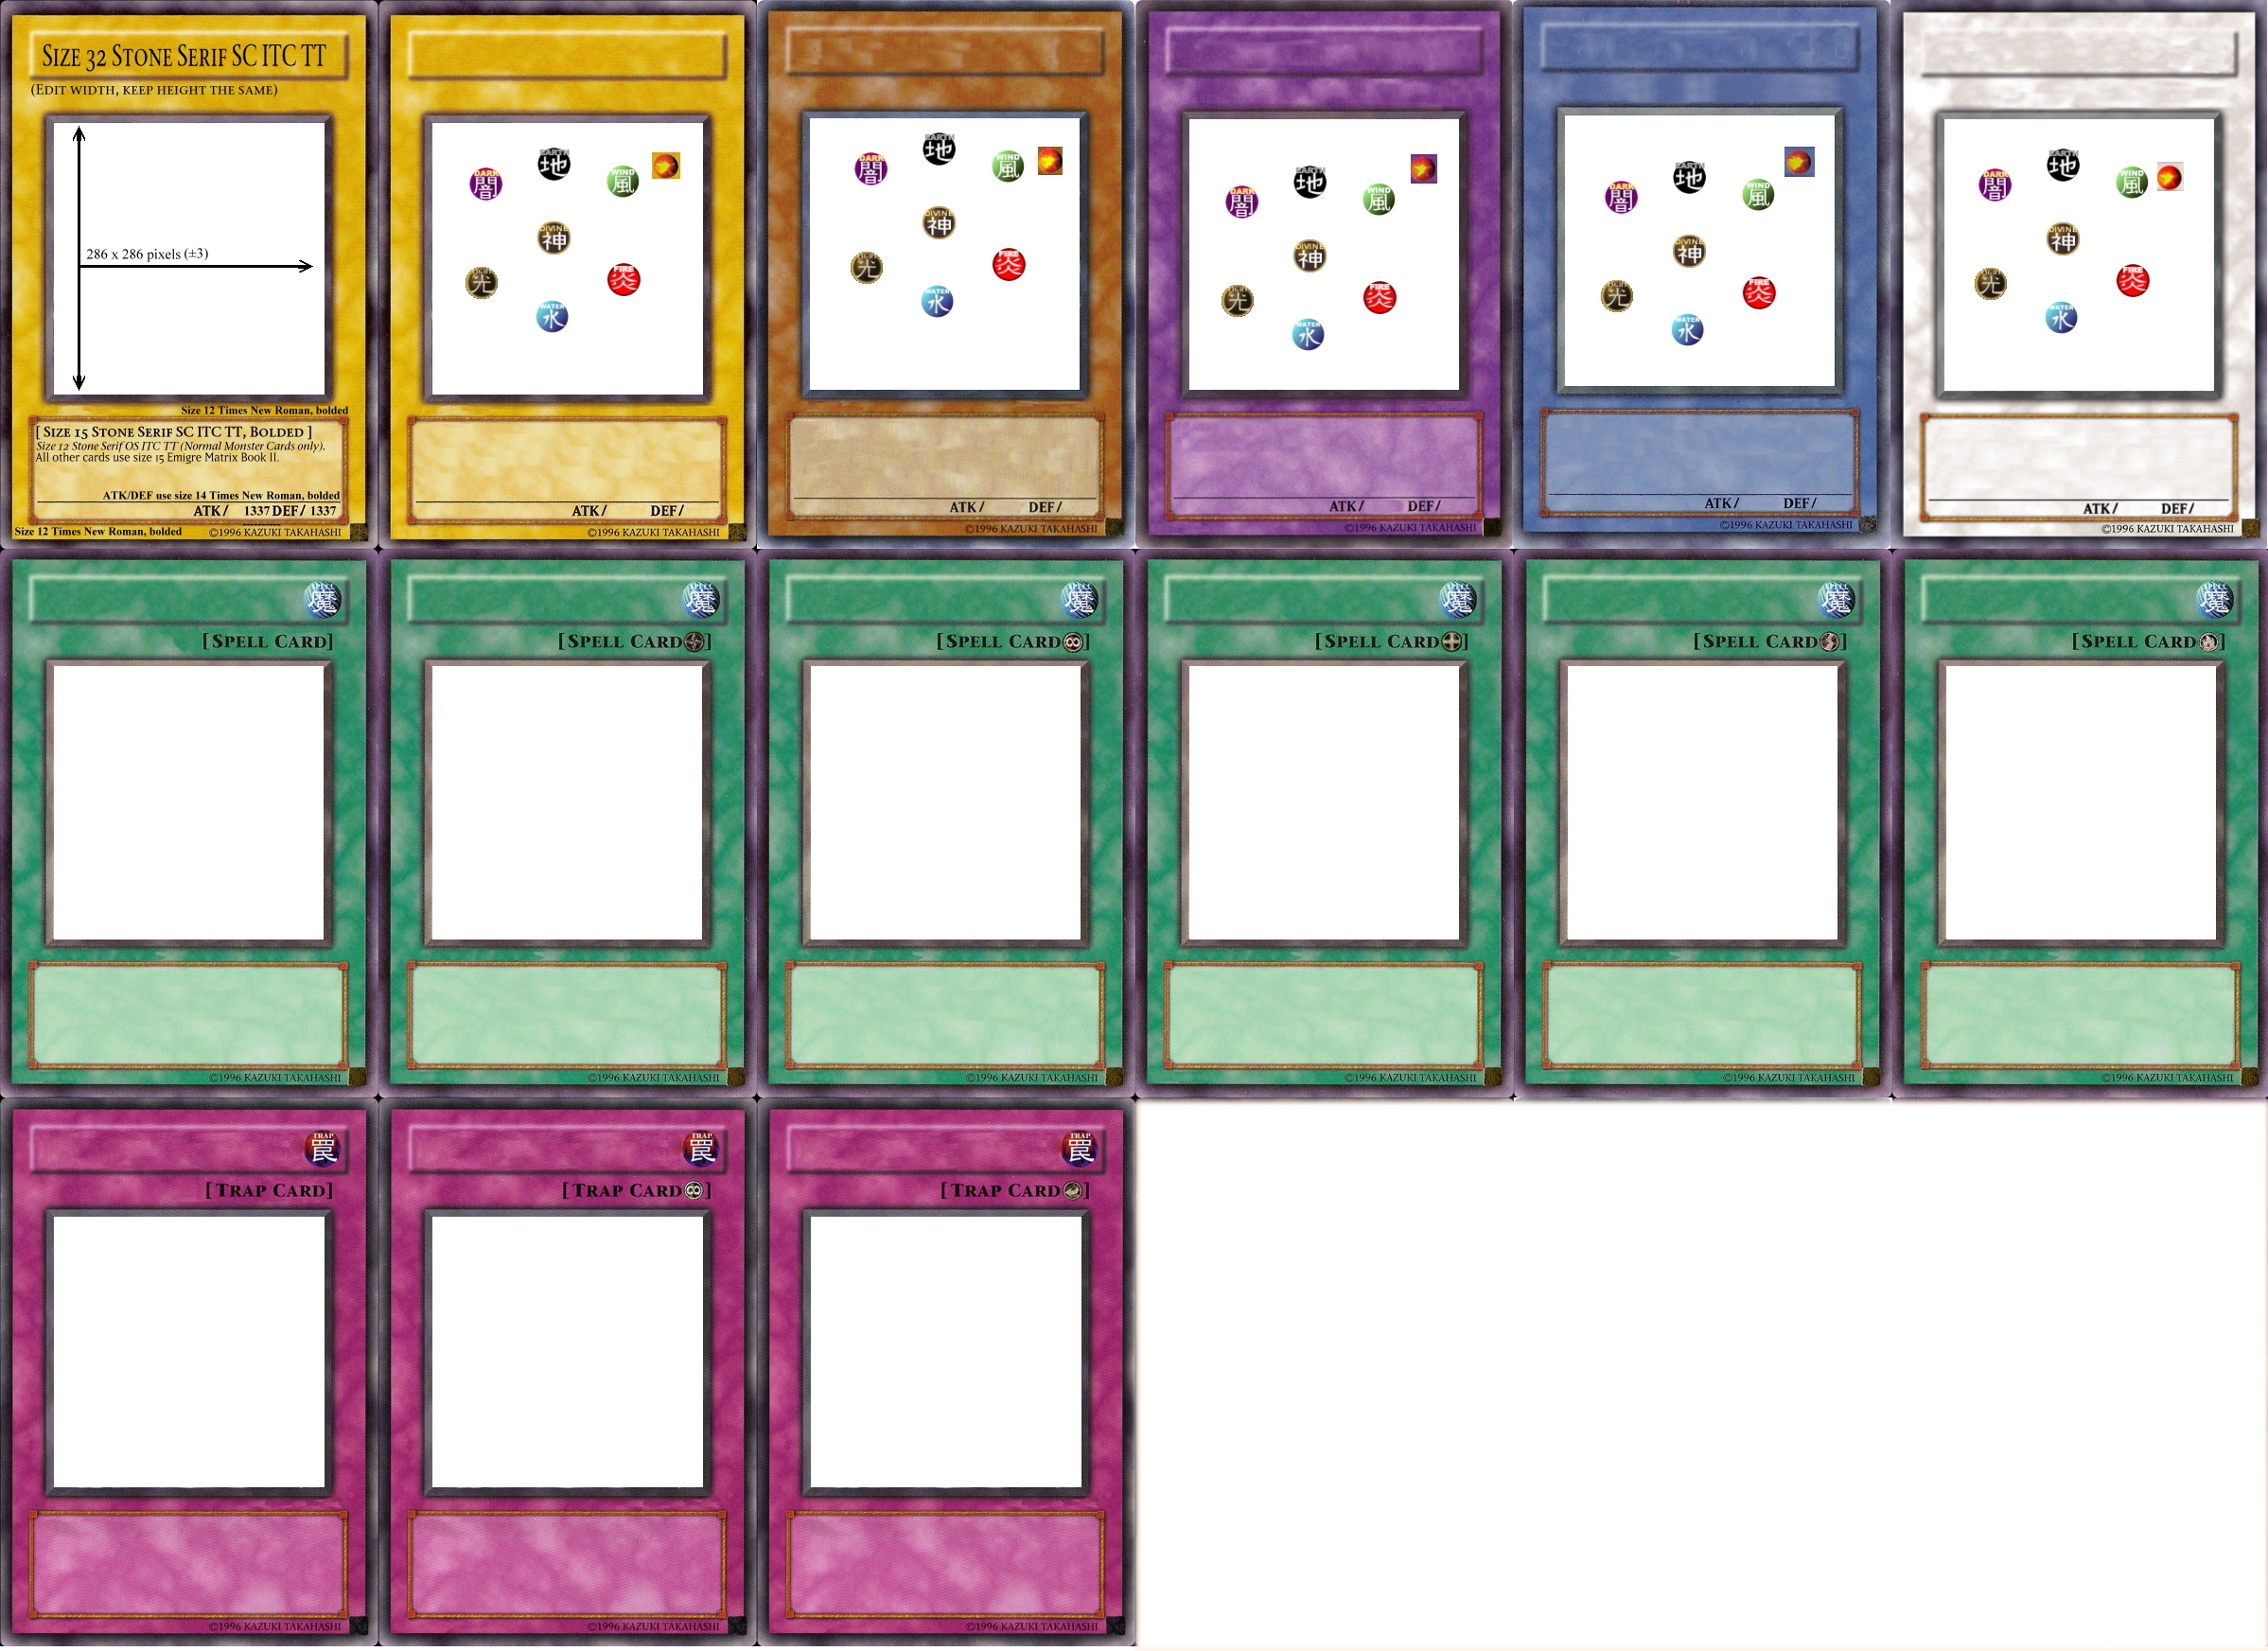 Yugioh Card Template by Pyruvate on DeviantArt Intended For Yugioh Card Template